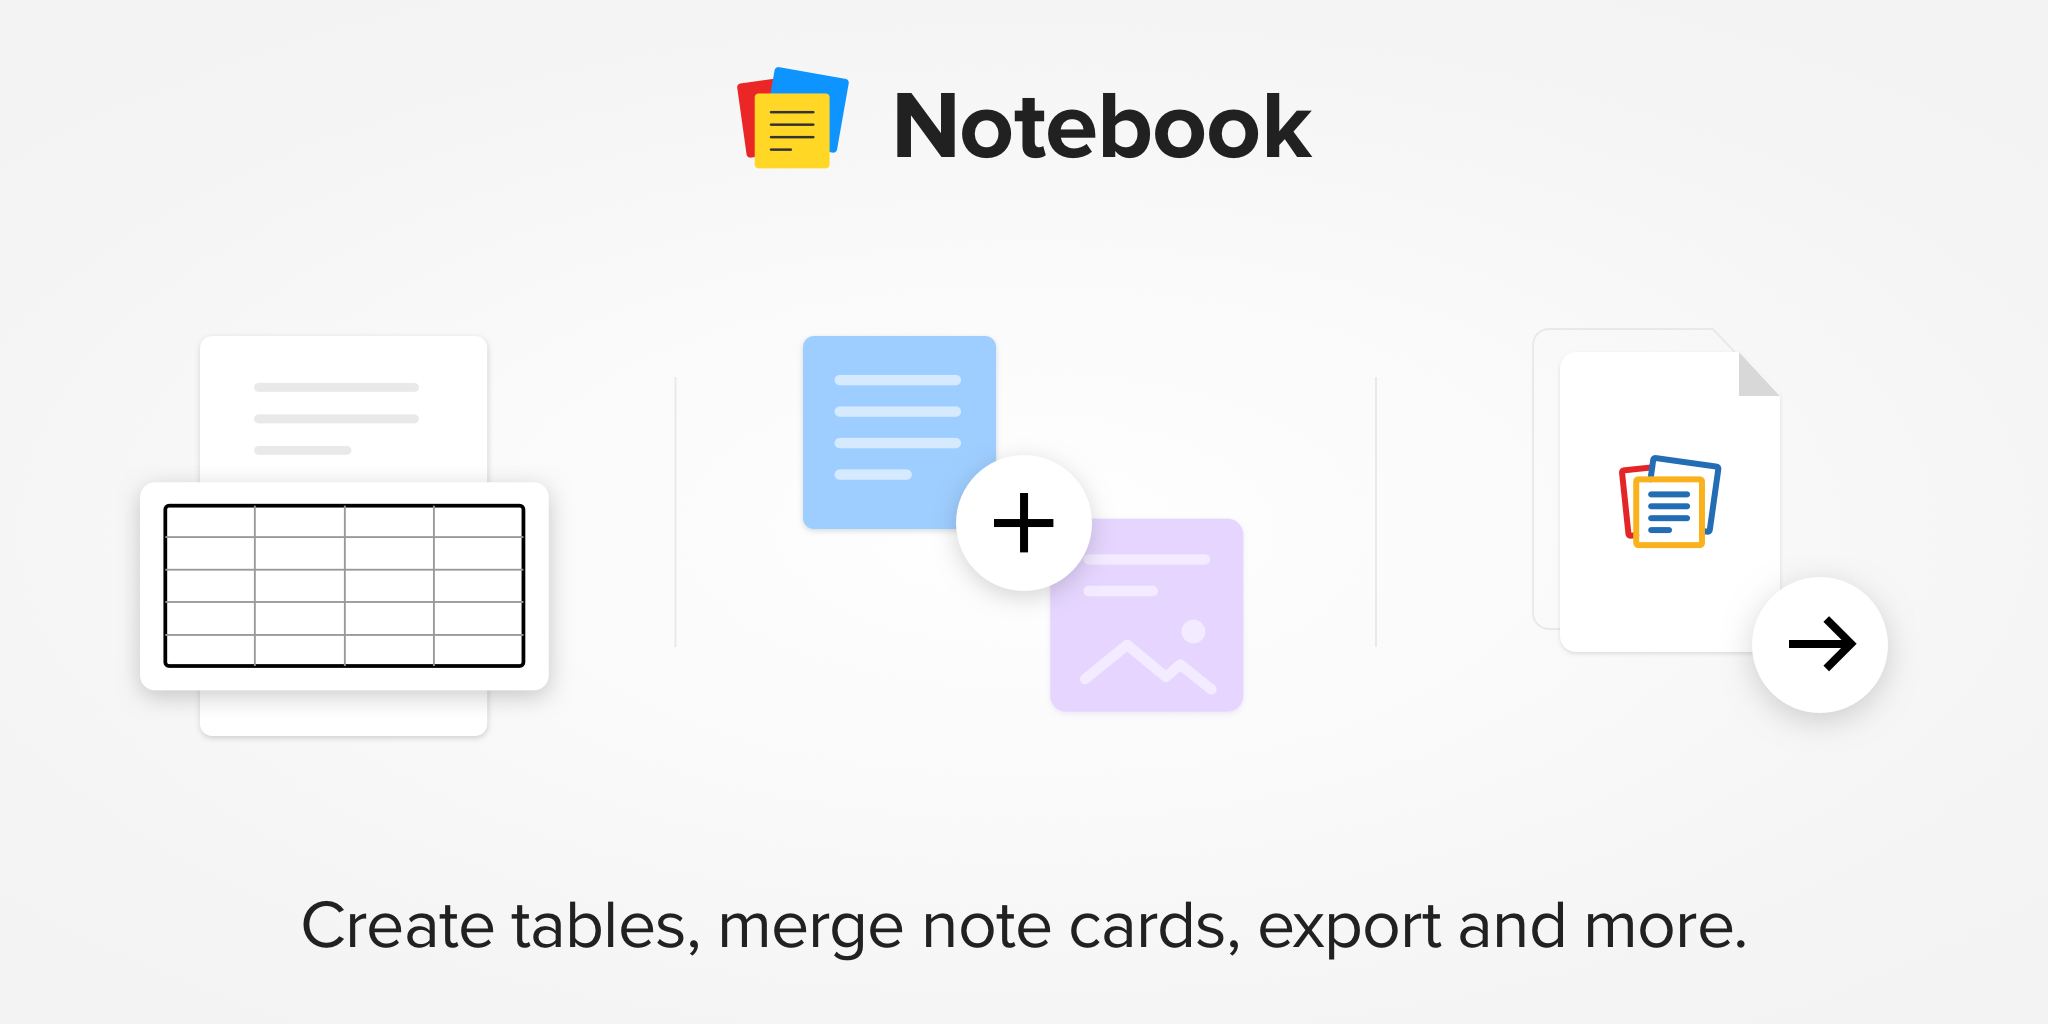 Notebook updates: create tables, merge note cards, and more